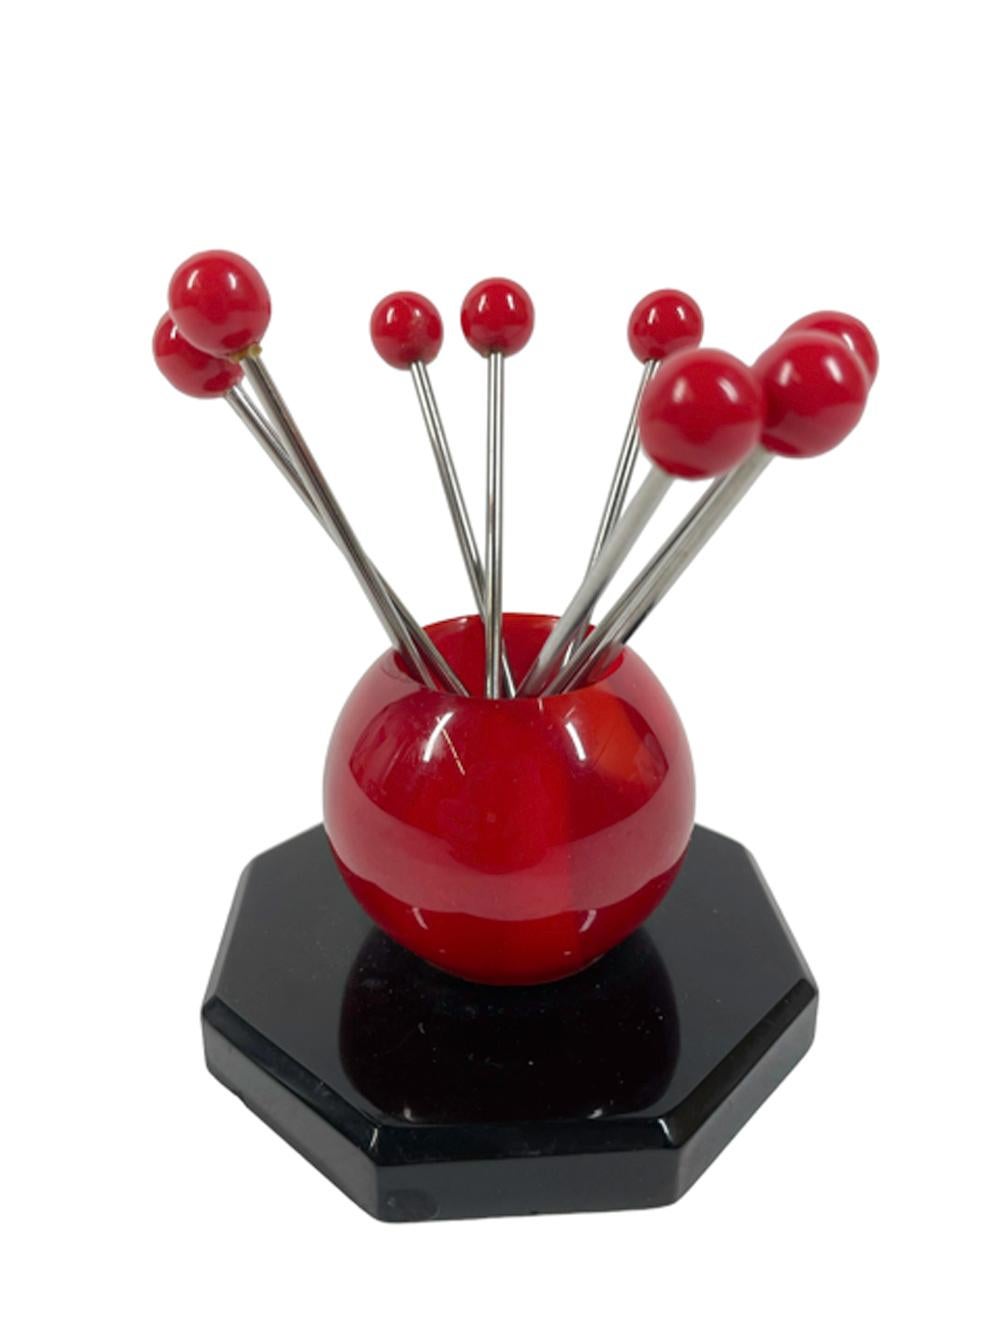 Eight Art Deco red ball-topped cocktail picks in a Bakelite stand of a red ball on a black octagonal base.